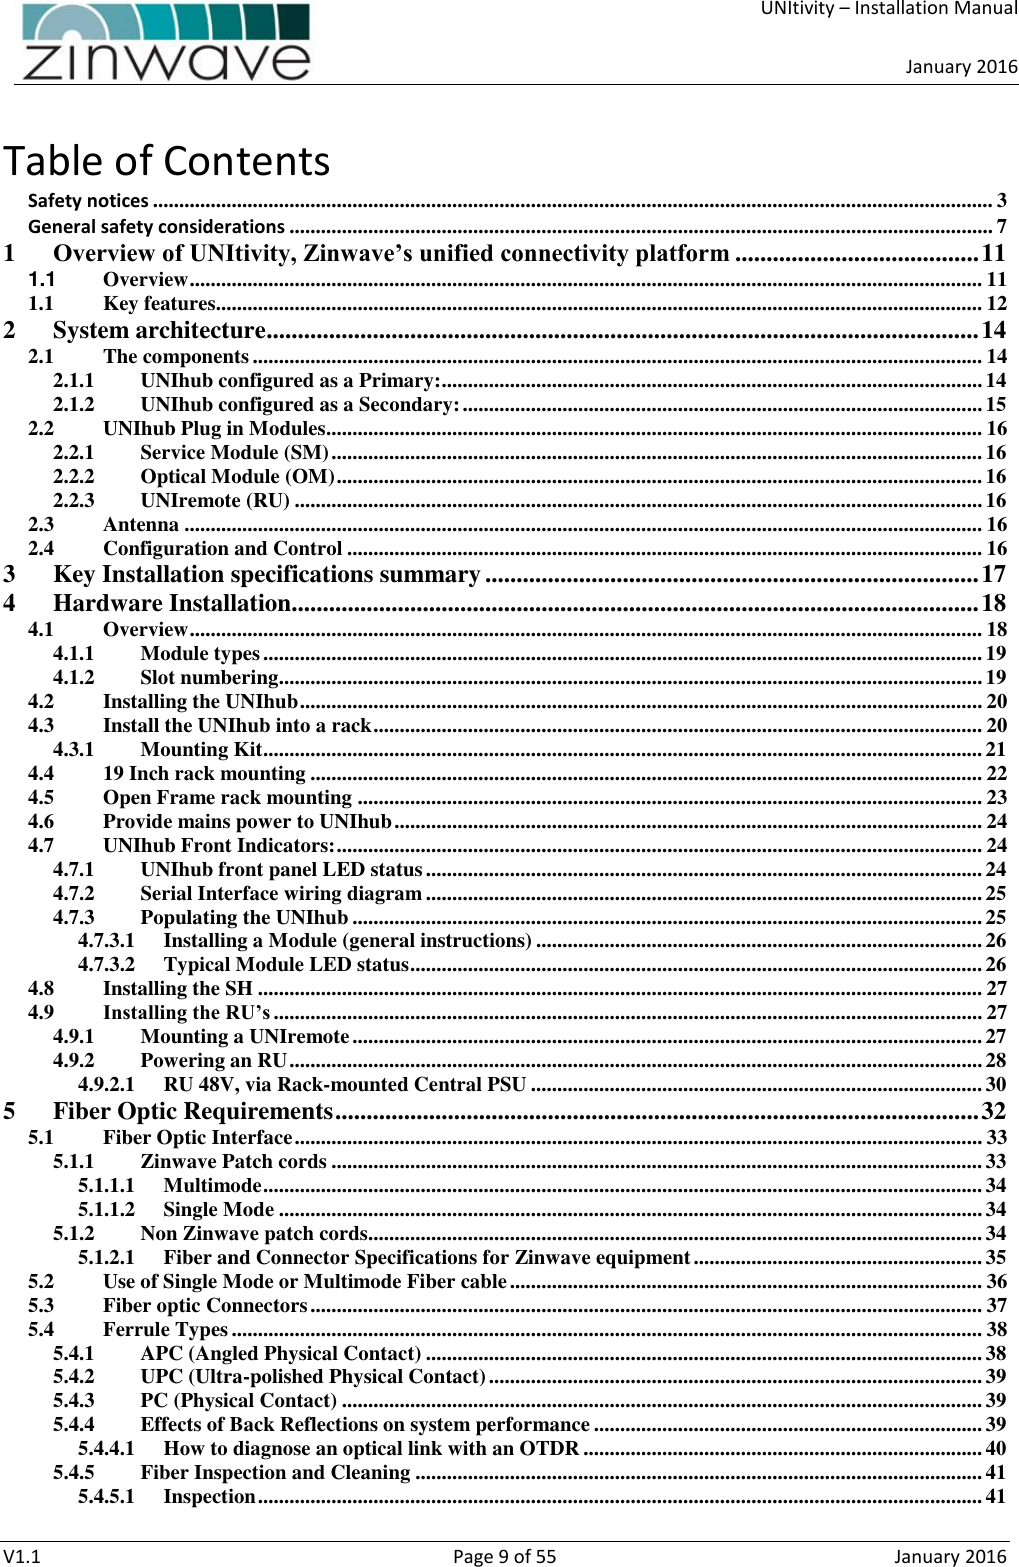     UNItivity – Installation Manual      January 2016  V1.1  Page 9 of 55  January 2016 Table of Contents Safety notices ................................................................................................................................................................ 3 General safety considerations ...................................................................................................................................... 7 1 Overview of UNItivity, Zinwave’s unified connectivity platform ....................................... 11 1.1 Overview ....................................................................................................................................................... 11 1.1 Key features.................................................................................................................................................. 12 2 System architecture.................................................................................................................. 14 2.1 The components ........................................................................................................................................... 14 2.1.1 UNIhub configured as a Primary:....................................................................................................... 14 2.1.2 UNIhub configured as a Secondary: ................................................................................................... 15 2.2 UNIhub Plug in Modules............................................................................................................................. 16 2.2.1 Service Module (SM) ............................................................................................................................ 16 2.2.2 Optical Module (OM) ........................................................................................................................... 16 2.2.3 UNIremote (RU) ................................................................................................................................... 16 2.3 Antenna ........................................................................................................................................................ 16 2.4 Configuration and Control ......................................................................................................................... 16 3 Key Installation specifications summary ............................................................................... 17 4 Hardware Installation.............................................................................................................. 18 4.1 Overview ....................................................................................................................................................... 18 4.1.1 Module types ......................................................................................................................................... 19 4.1.2 Slot numbering...................................................................................................................................... 19 4.2 Installing the UNIhub .................................................................................................................................. 20 4.3 Install the UNIhub into a rack .................................................................................................................... 20 4.3.1 Mounting Kit ......................................................................................................................................... 21 4.4 19 Inch rack mounting ................................................................................................................................ 22 4.5 Open Frame rack mounting ....................................................................................................................... 23 4.6 Provide mains power to UNIhub ................................................................................................................ 24 4.7 UNIhub Front Indicators: ........................................................................................................................... 24 4.7.1 UNIhub front panel LED status .......................................................................................................... 24 4.7.2 Serial Interface wiring diagram .......................................................................................................... 25 4.7.3 Populating the UNIhub ........................................................................................................................ 25 4.7.3.1 Installing a Module (general instructions) ..................................................................................... 26 4.7.3.2 Typical Module LED status ............................................................................................................. 26 4.8 Installing the SH .......................................................................................................................................... 27 4.9 Installing the RU’s ....................................................................................................................................... 27 4.9.1 Mounting a UNIremote ........................................................................................................................ 27 4.9.2 Powering an RU .................................................................................................................................... 28 4.9.2.1 RU 48V, via Rack-mounted Central PSU ...................................................................................... 30 5 Fiber Optic Requirements ....................................................................................................... 32 5.1 Fiber Optic Interface ................................................................................................................................... 33 5.1.1 Zinwave Patch cords ............................................................................................................................ 33 5.1.1.1 Multimode ......................................................................................................................................... 34 5.1.1.2 Single Mode ...................................................................................................................................... 34 5.1.2 Non Zinwave patch cords..................................................................................................................... 34 5.1.2.1 Fiber and Connector Specifications for Zinwave equipment ....................................................... 35 5.2 Use of Single Mode or Multimode Fiber cable .......................................................................................... 36 5.3 Fiber optic Connectors ................................................................................................................................ 37 5.4 Ferrule Types ............................................................................................................................................... 38 5.4.1 APC (Angled Physical Contact) .......................................................................................................... 38 5.4.2 UPC (Ultra-polished Physical Contact) .............................................................................................. 39 5.4.3 PC (Physical Contact) .......................................................................................................................... 39 5.4.4 Effects of Back Reflections on system performance .......................................................................... 39 5.4.4.1 How to diagnose an optical link with an OTDR ............................................................................ 40 5.4.5 Fiber Inspection and Cleaning ............................................................................................................ 41 5.4.5.1 Inspection .......................................................................................................................................... 41 